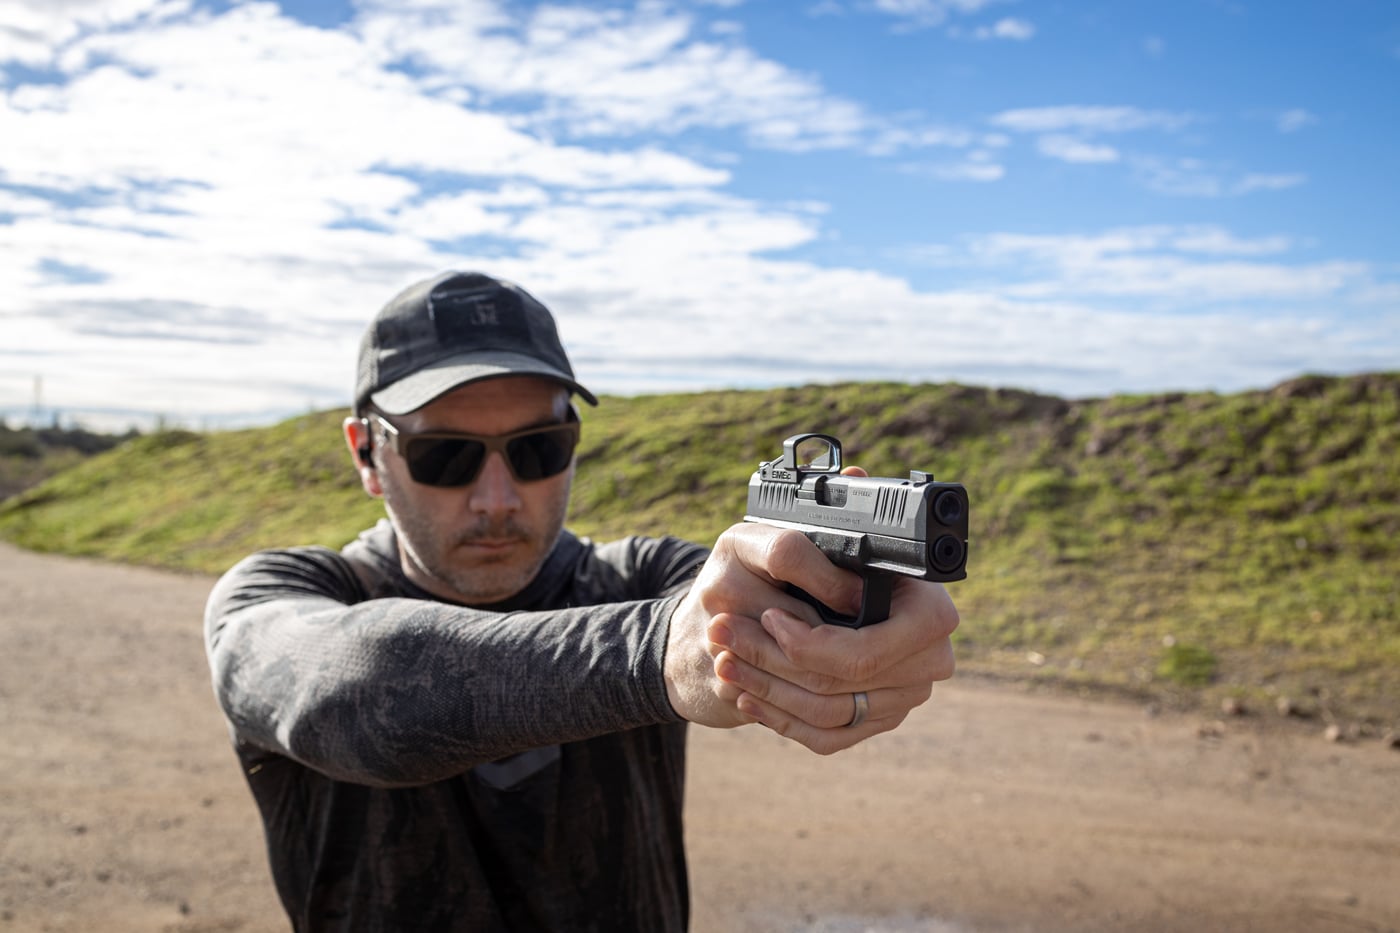 In this photo we see the author testing the Hellcat Pro Comp on the shooting range with 9mm ammo. He wanted to determine if the comp worked as advertised.